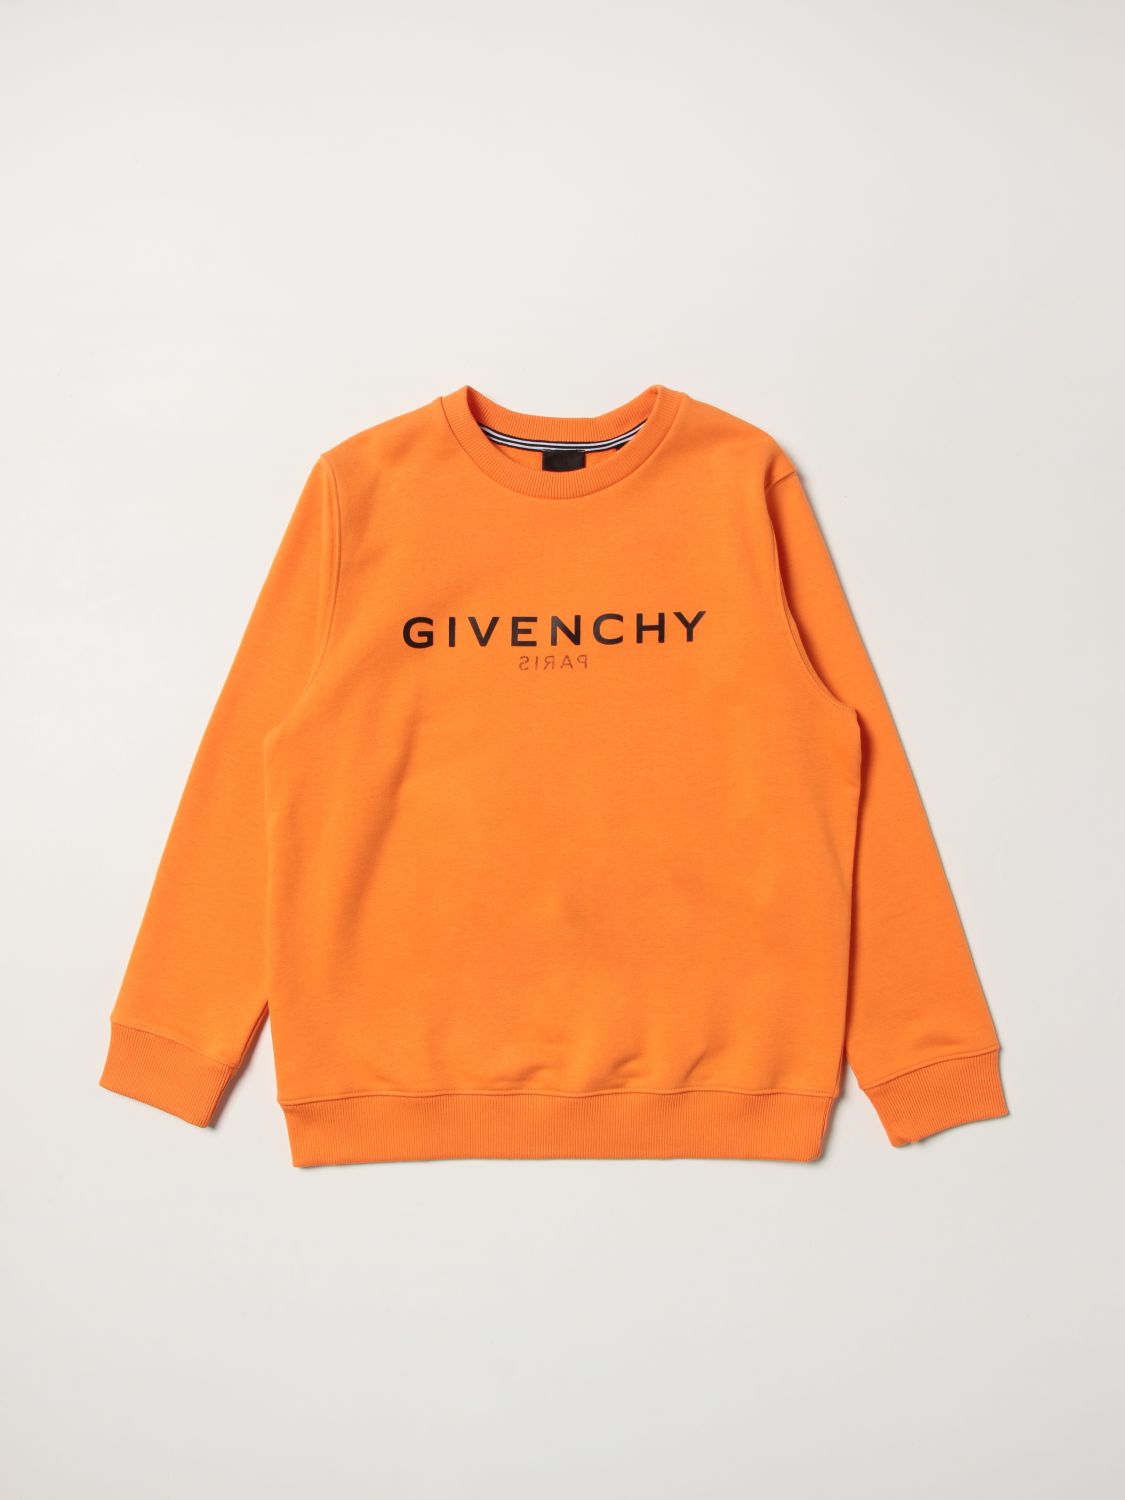 GIVENCHY: sweatshirt with logo - Orange | Givenchy sweater H25318 online on  